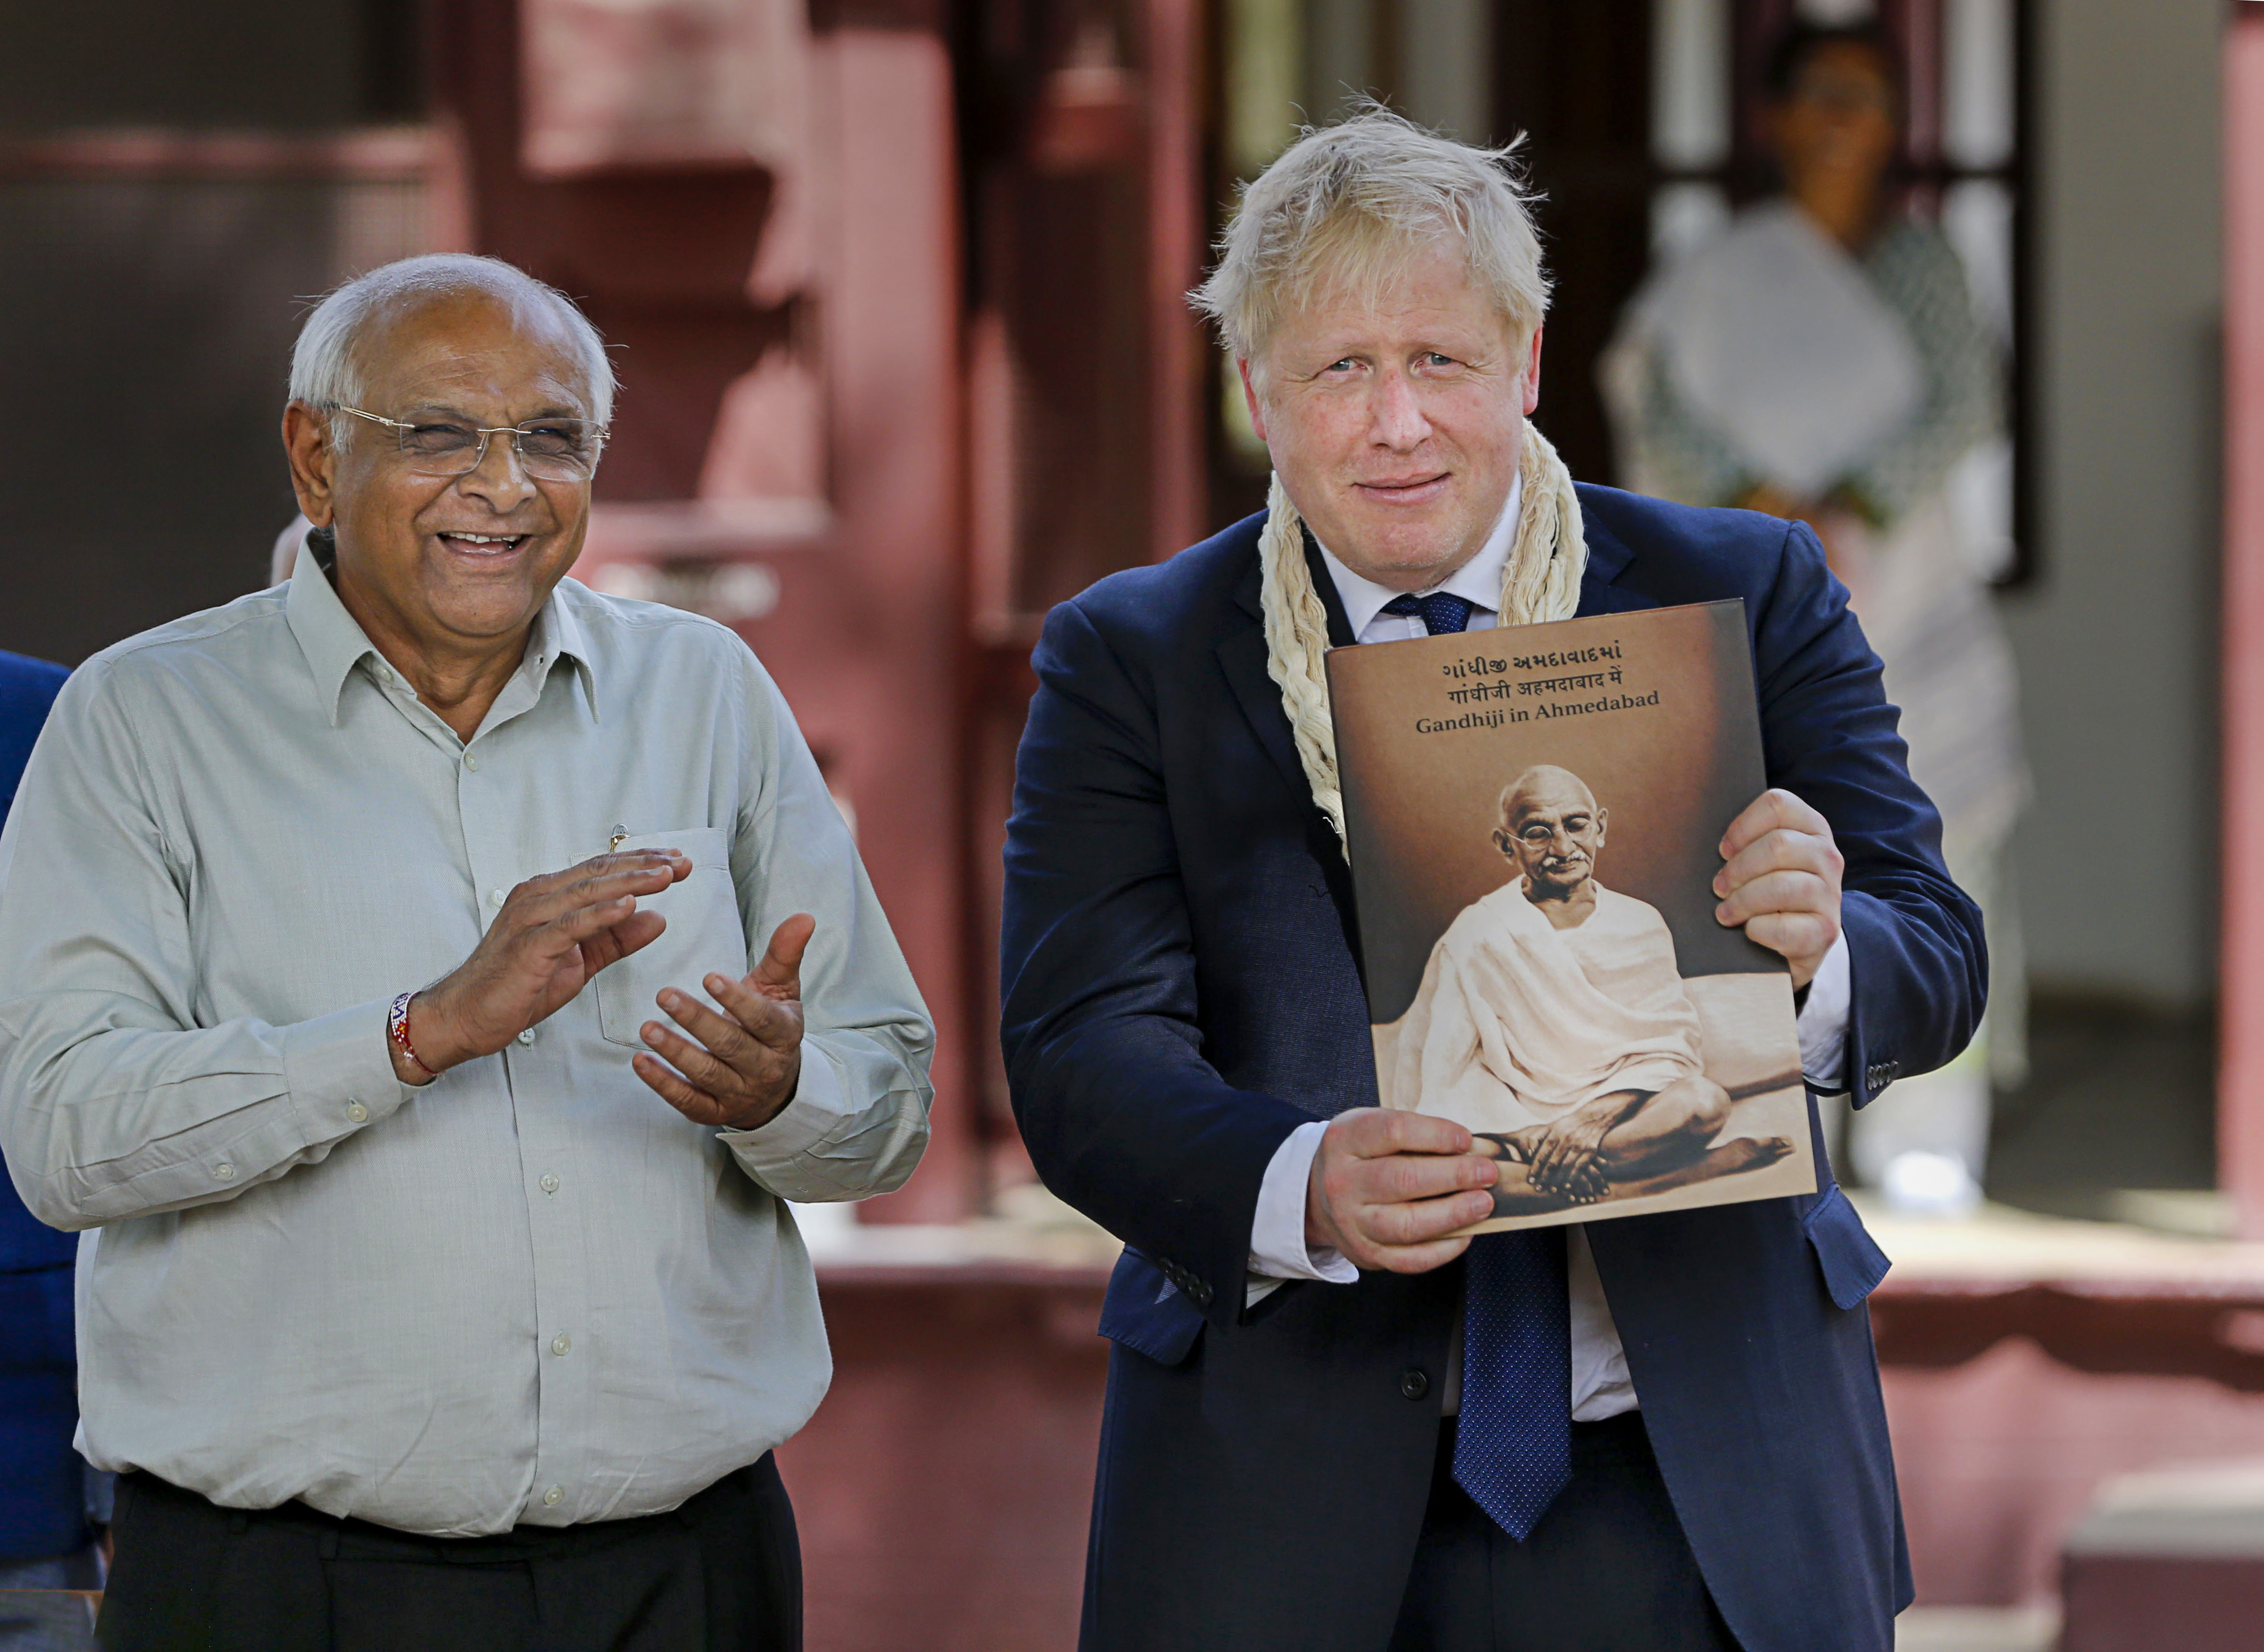 In new pacts with India, British PM Johnson speaks of creating 11,000 jobs across the UK